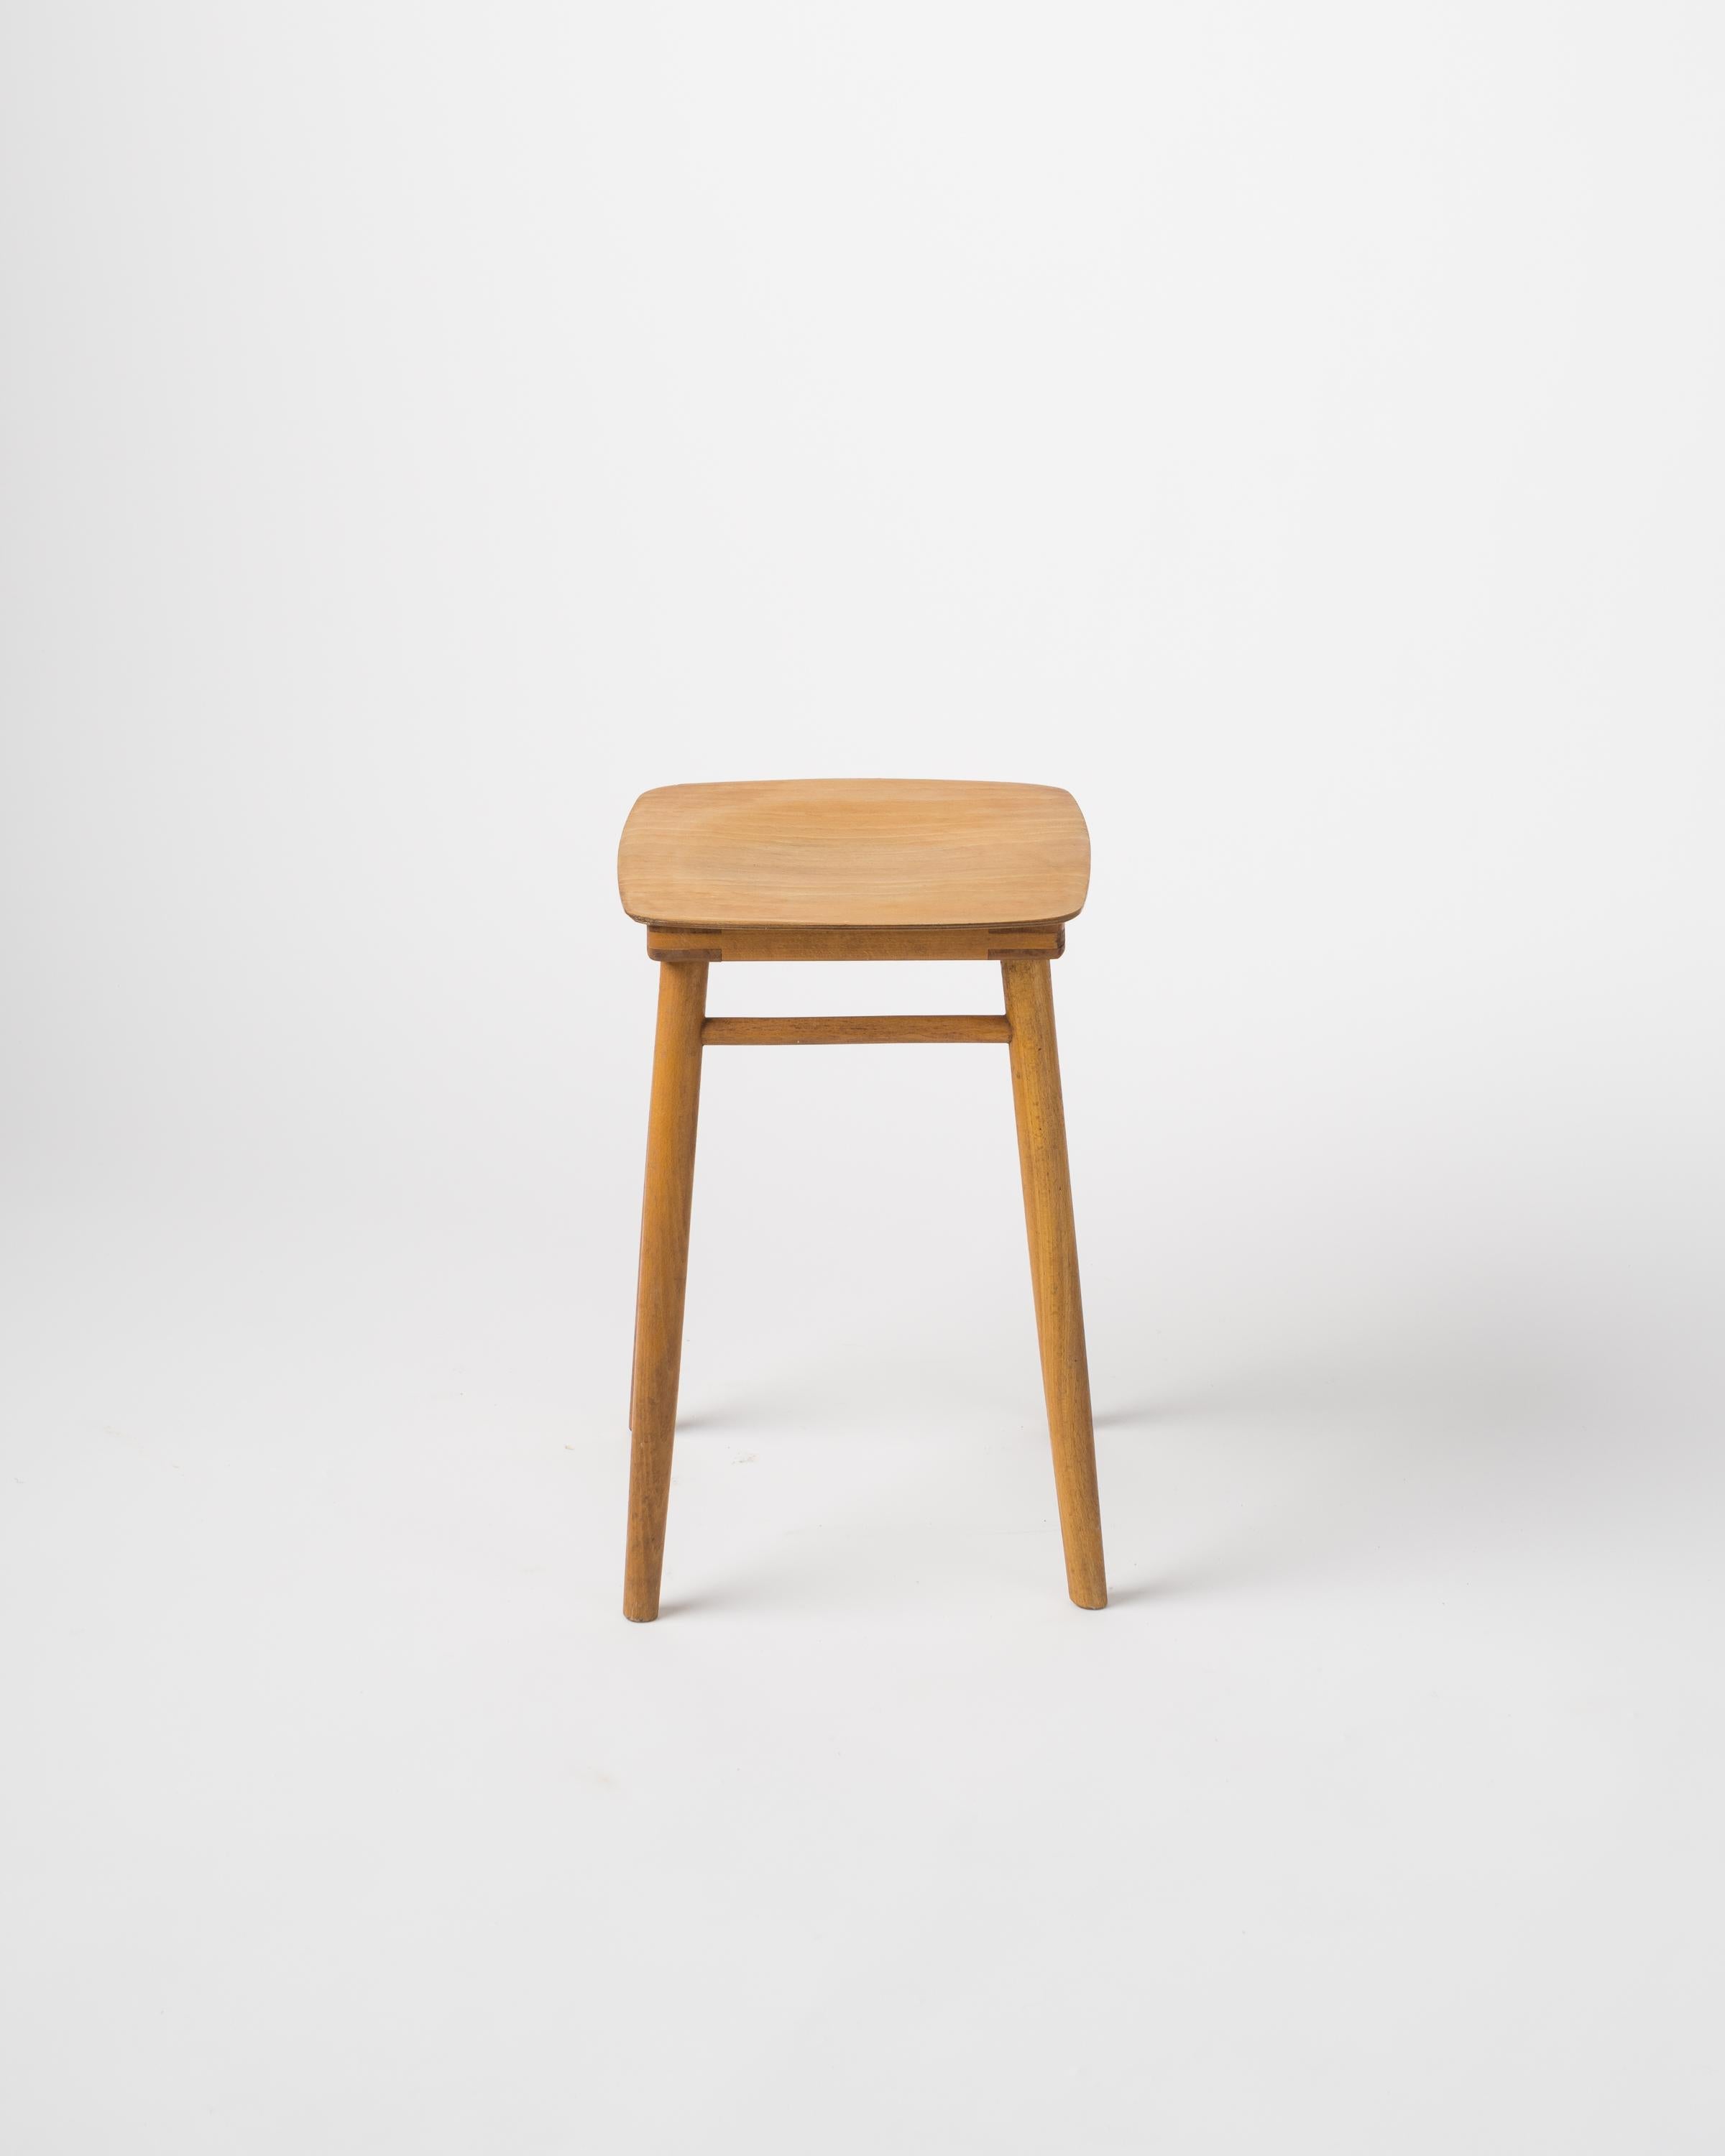 French Minimalist Beech Wood Stool, France, 1960's For Sale